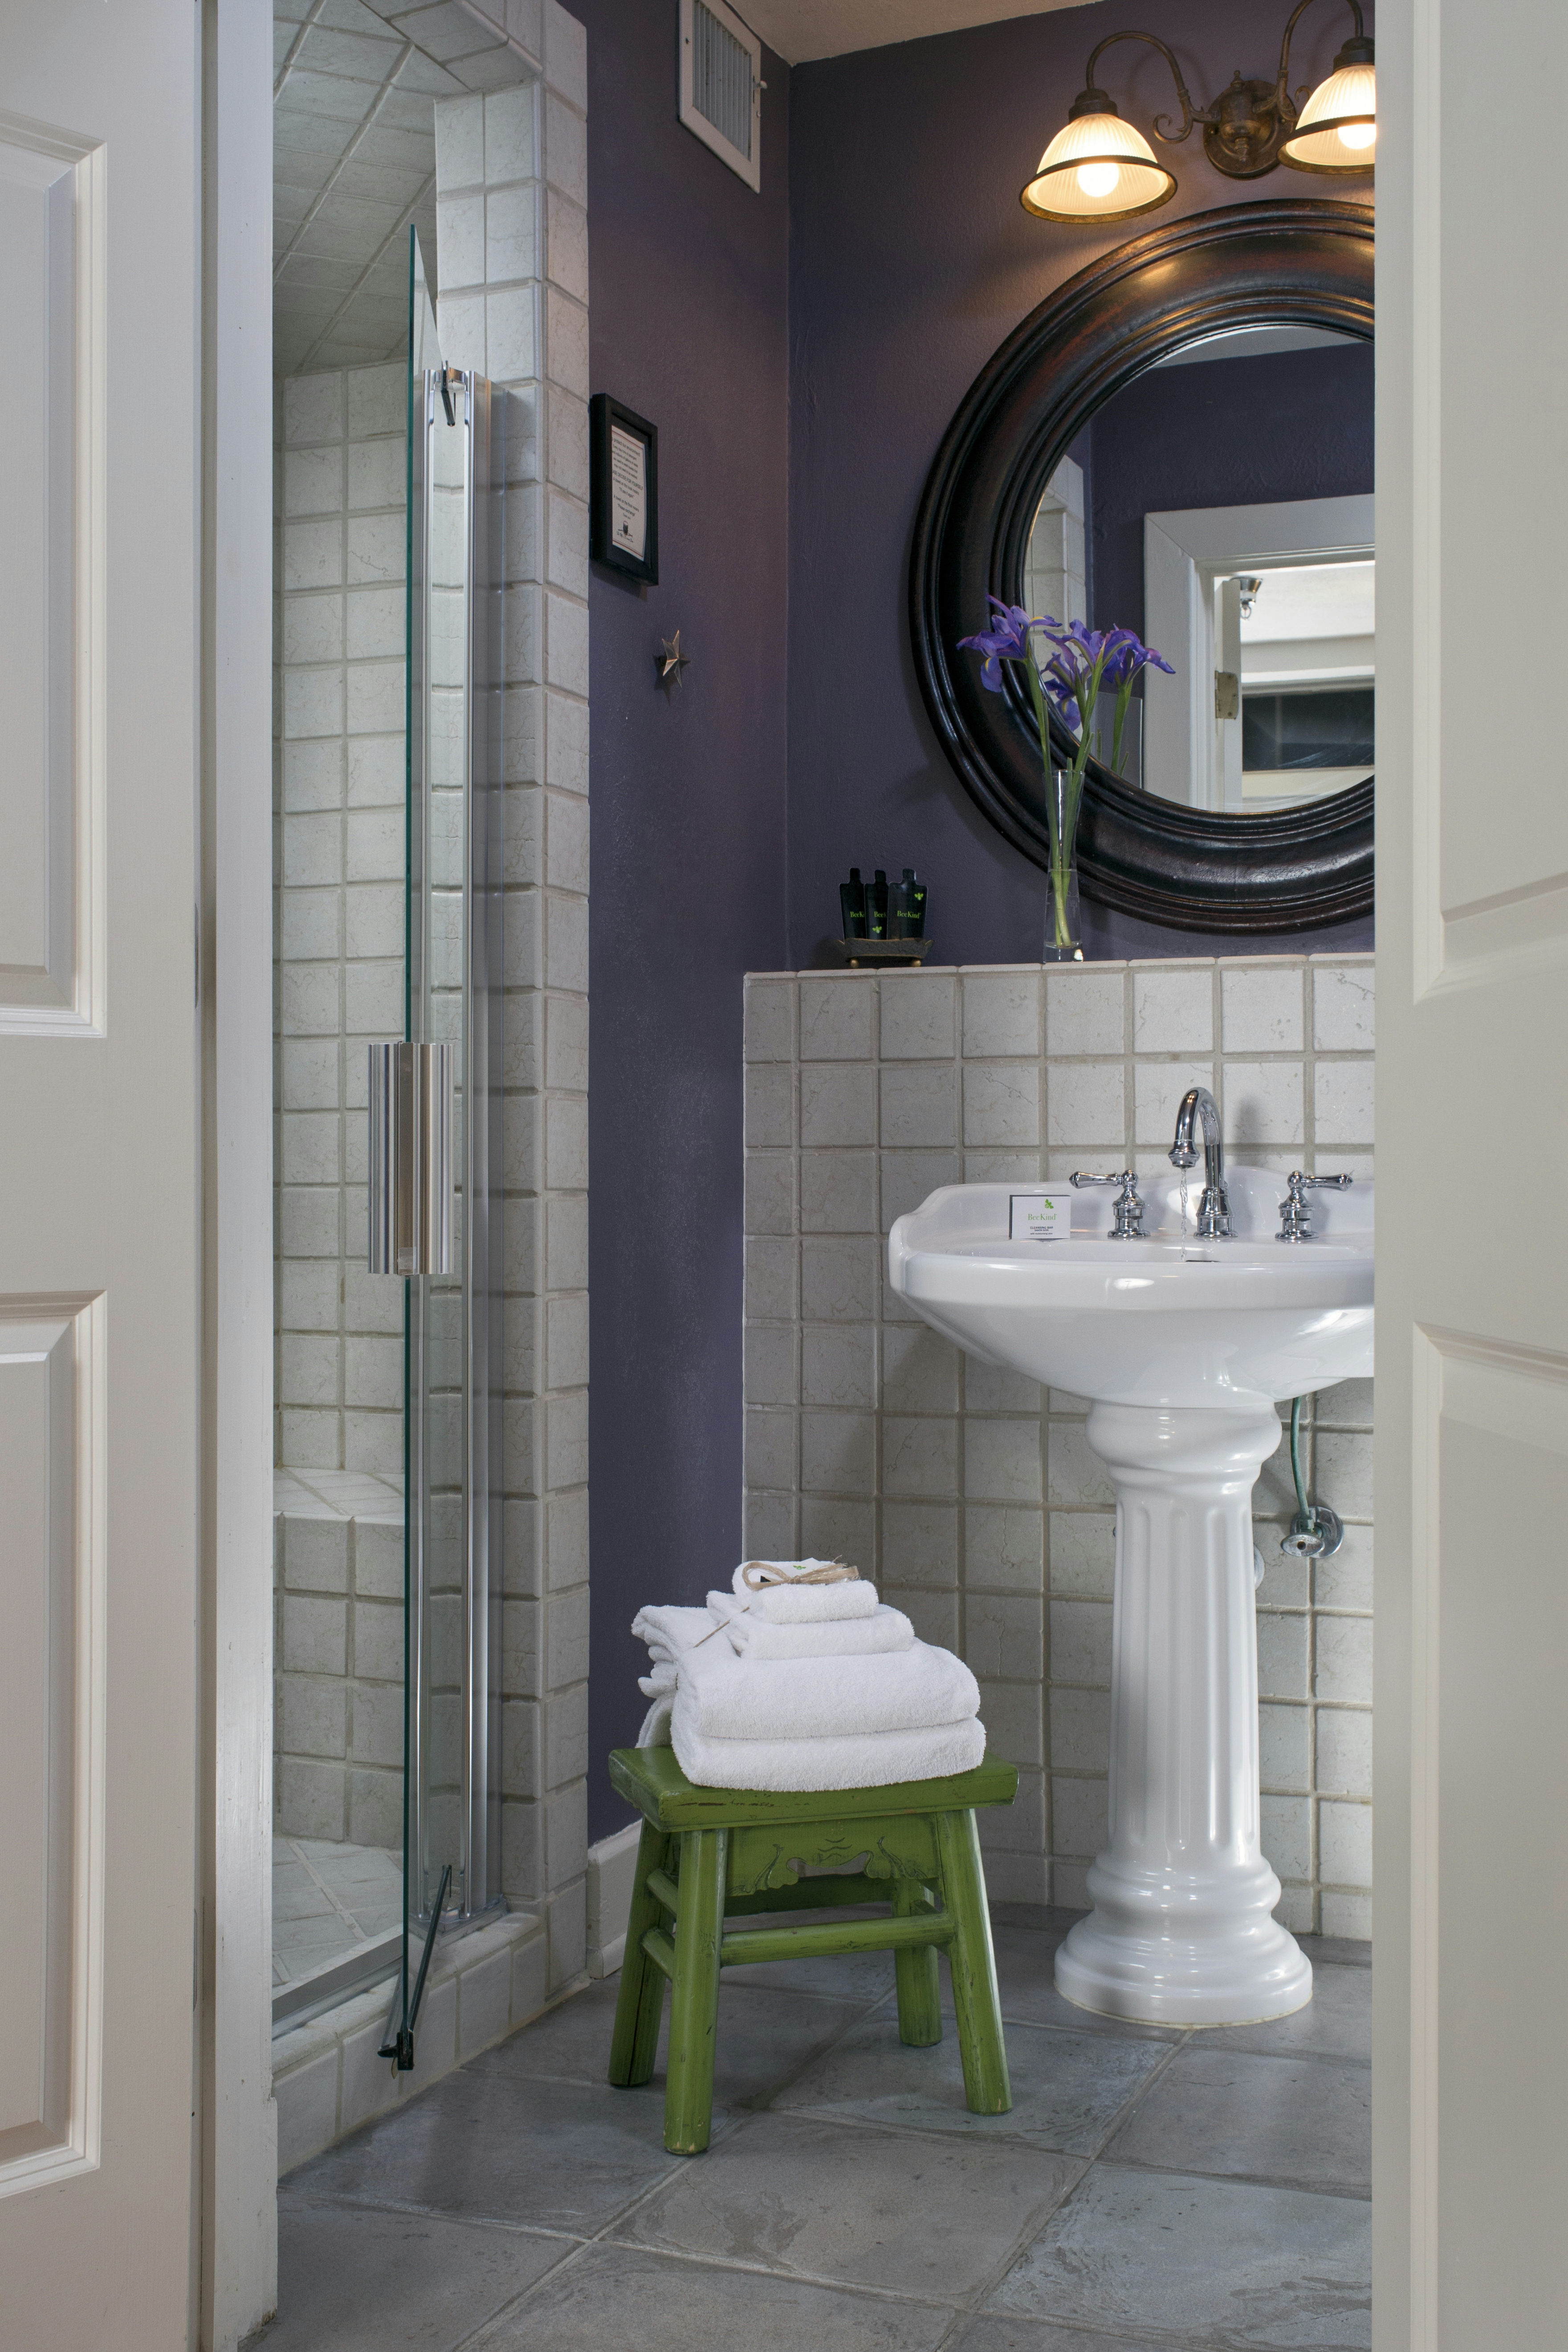 Bathroom with lavender walls, white pedestal sink, framed mirror, and tiled shower with glass doors